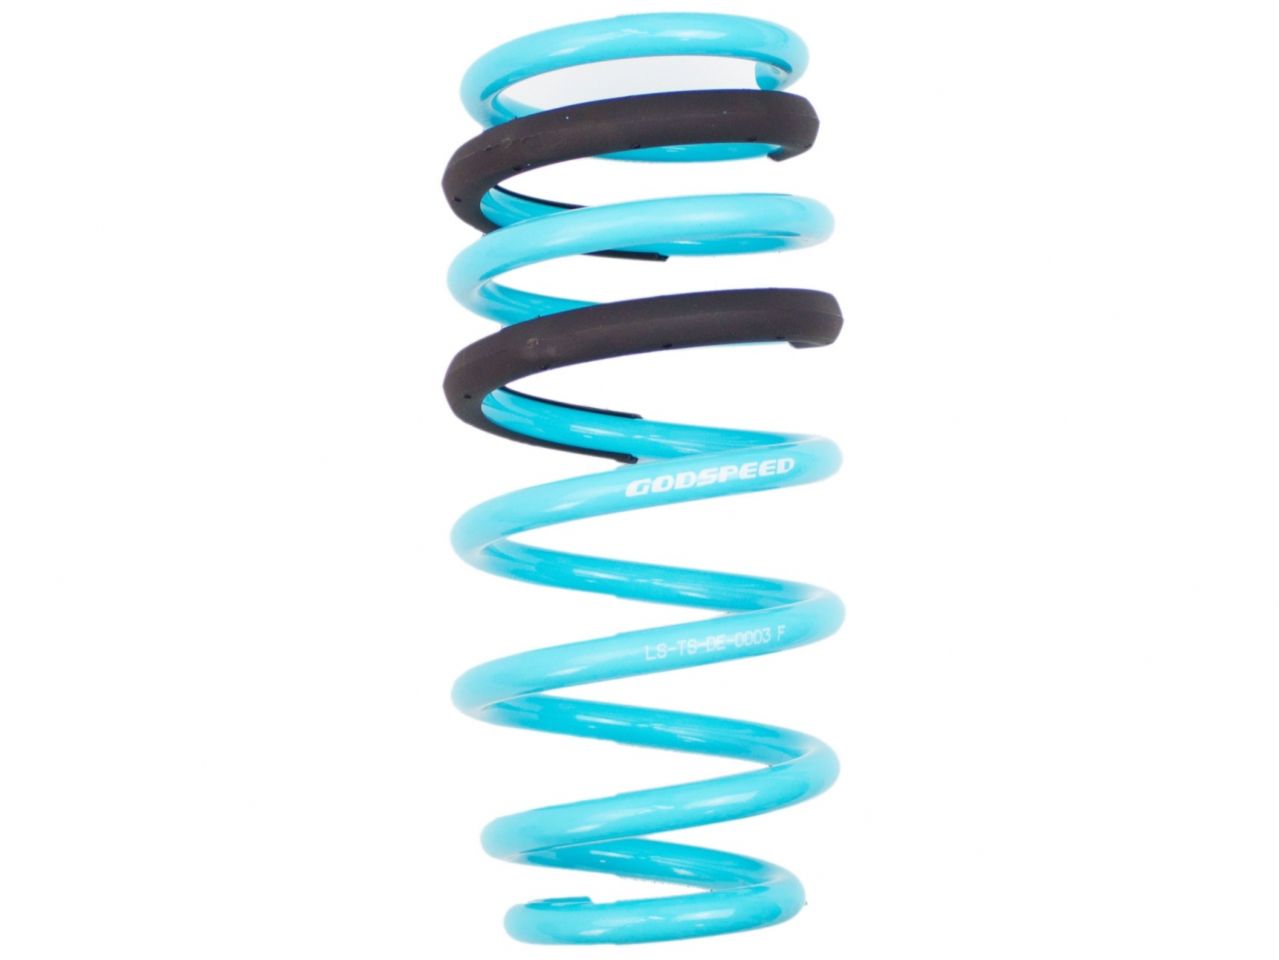 Godspeed Performance Lowering Springs For Dodge Charger R/t Srt Rwd W/o Nivomat